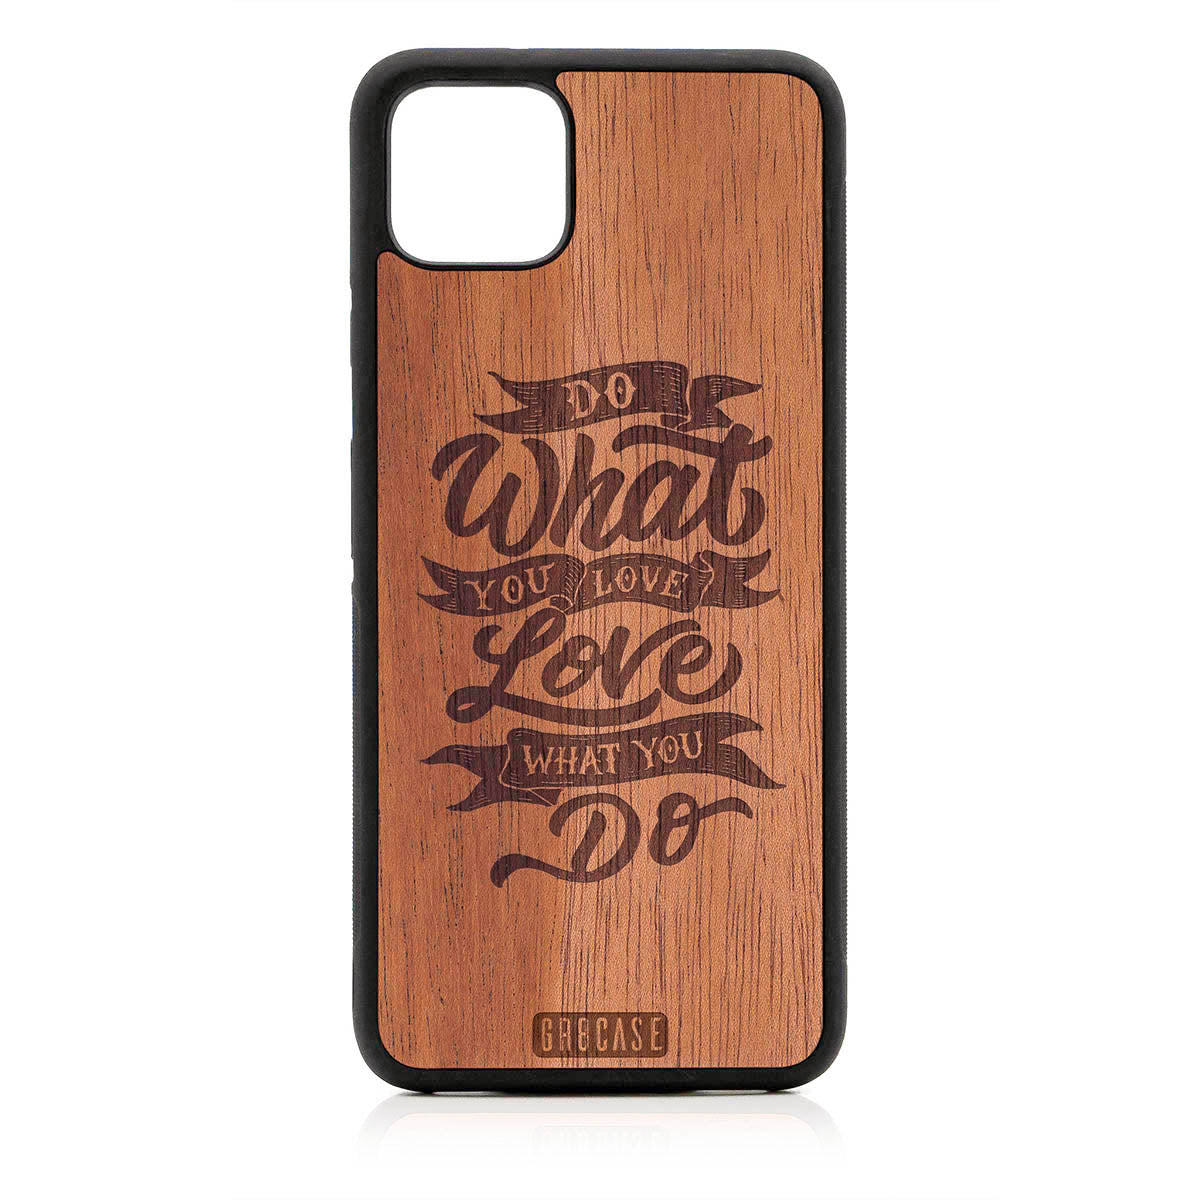 Do What You Love Love What You Do Design Wood Case For Google Pixel 4XL by GR8CASE